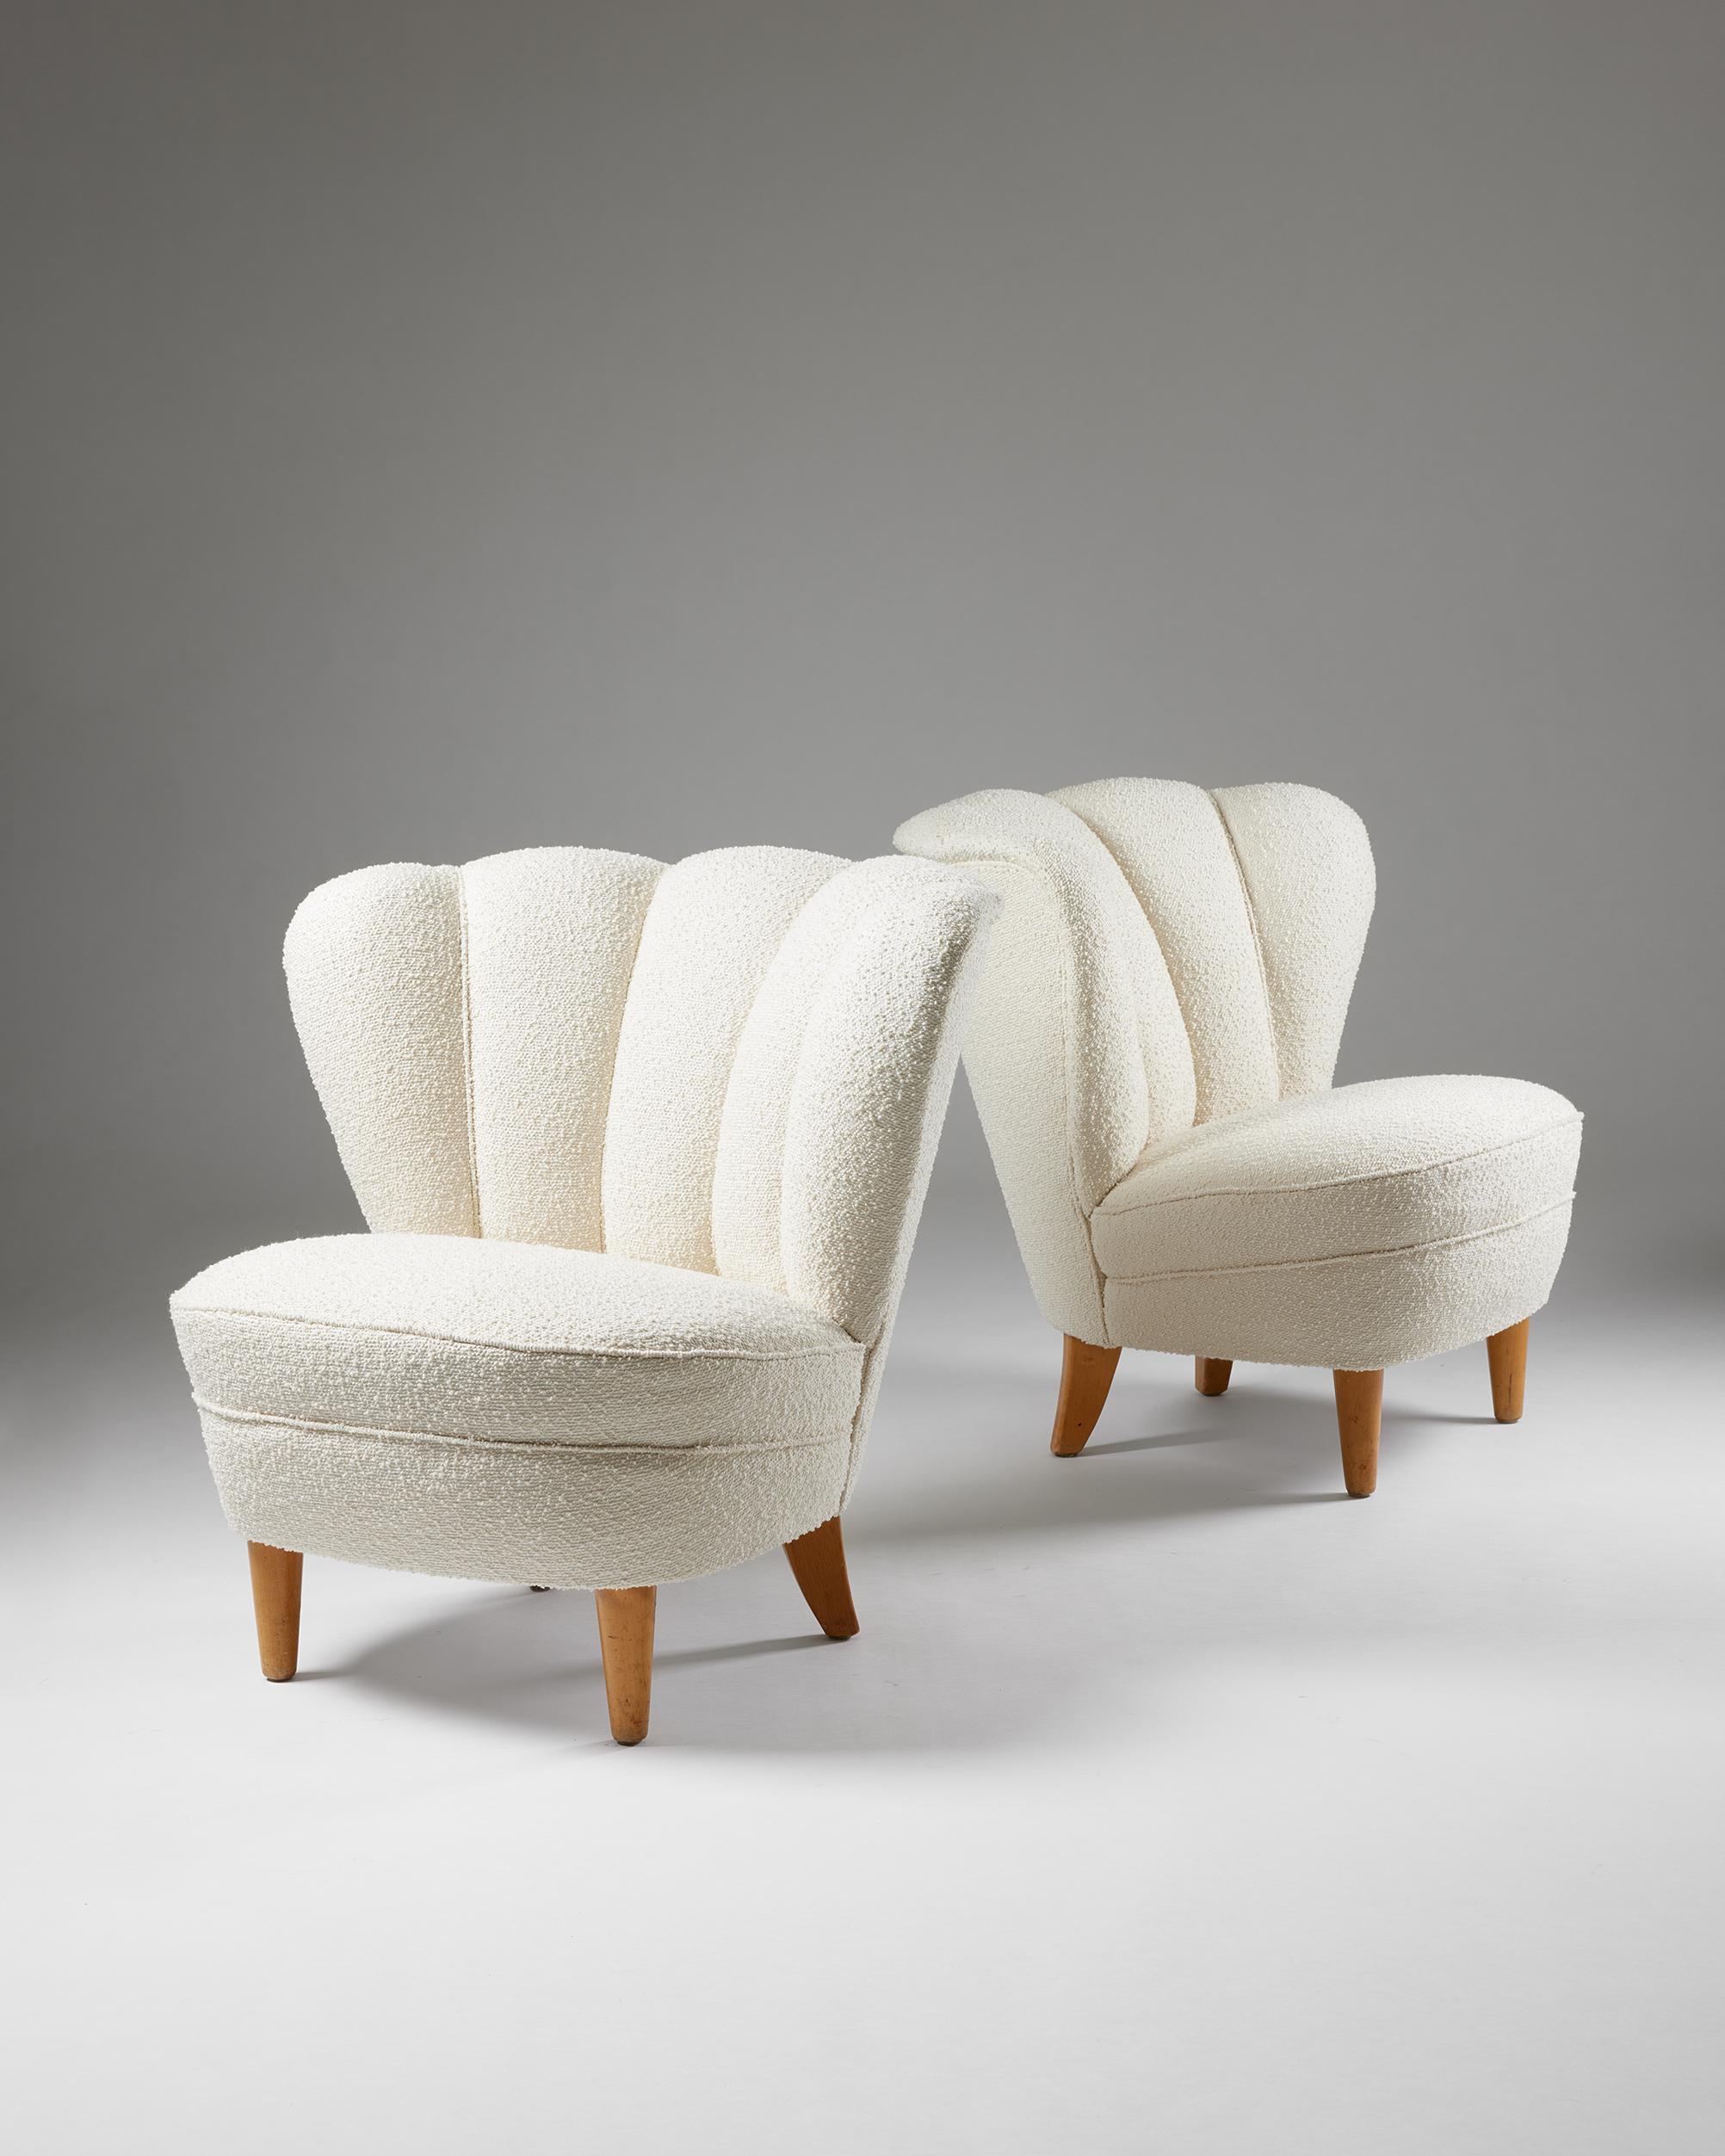 Pair of easy chairs, anonymous,
Finland, 1950s.

Wool upholstery and lacquered wood.

H: 68 cm
W: 75 cm
D: 82 cm
SH: 44 cm